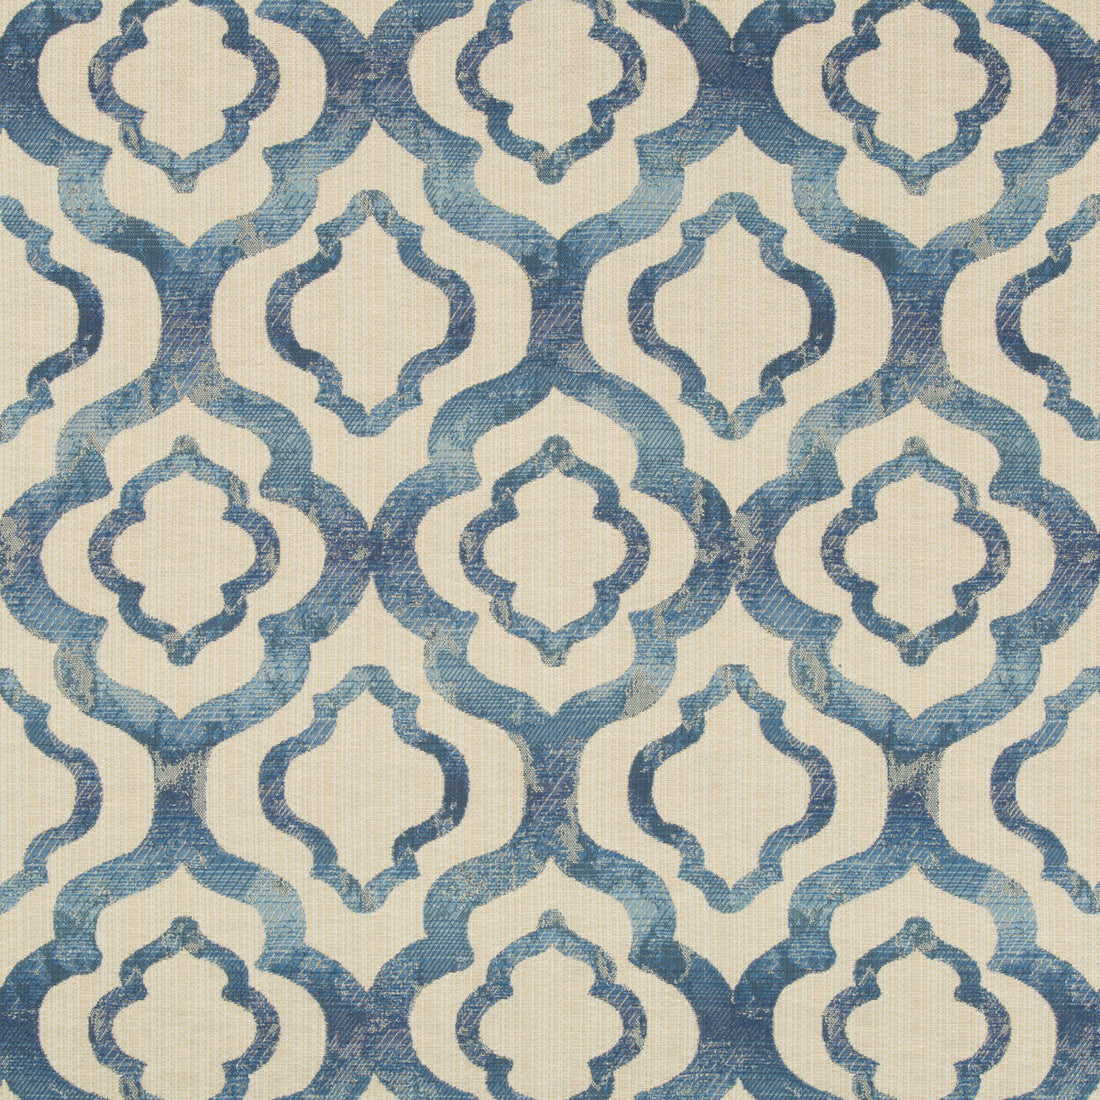 Kravet Contract fabric in 35039-15 color - pattern 35039.15.0 - by Kravet Contract in the Incase Crypton Gis collection